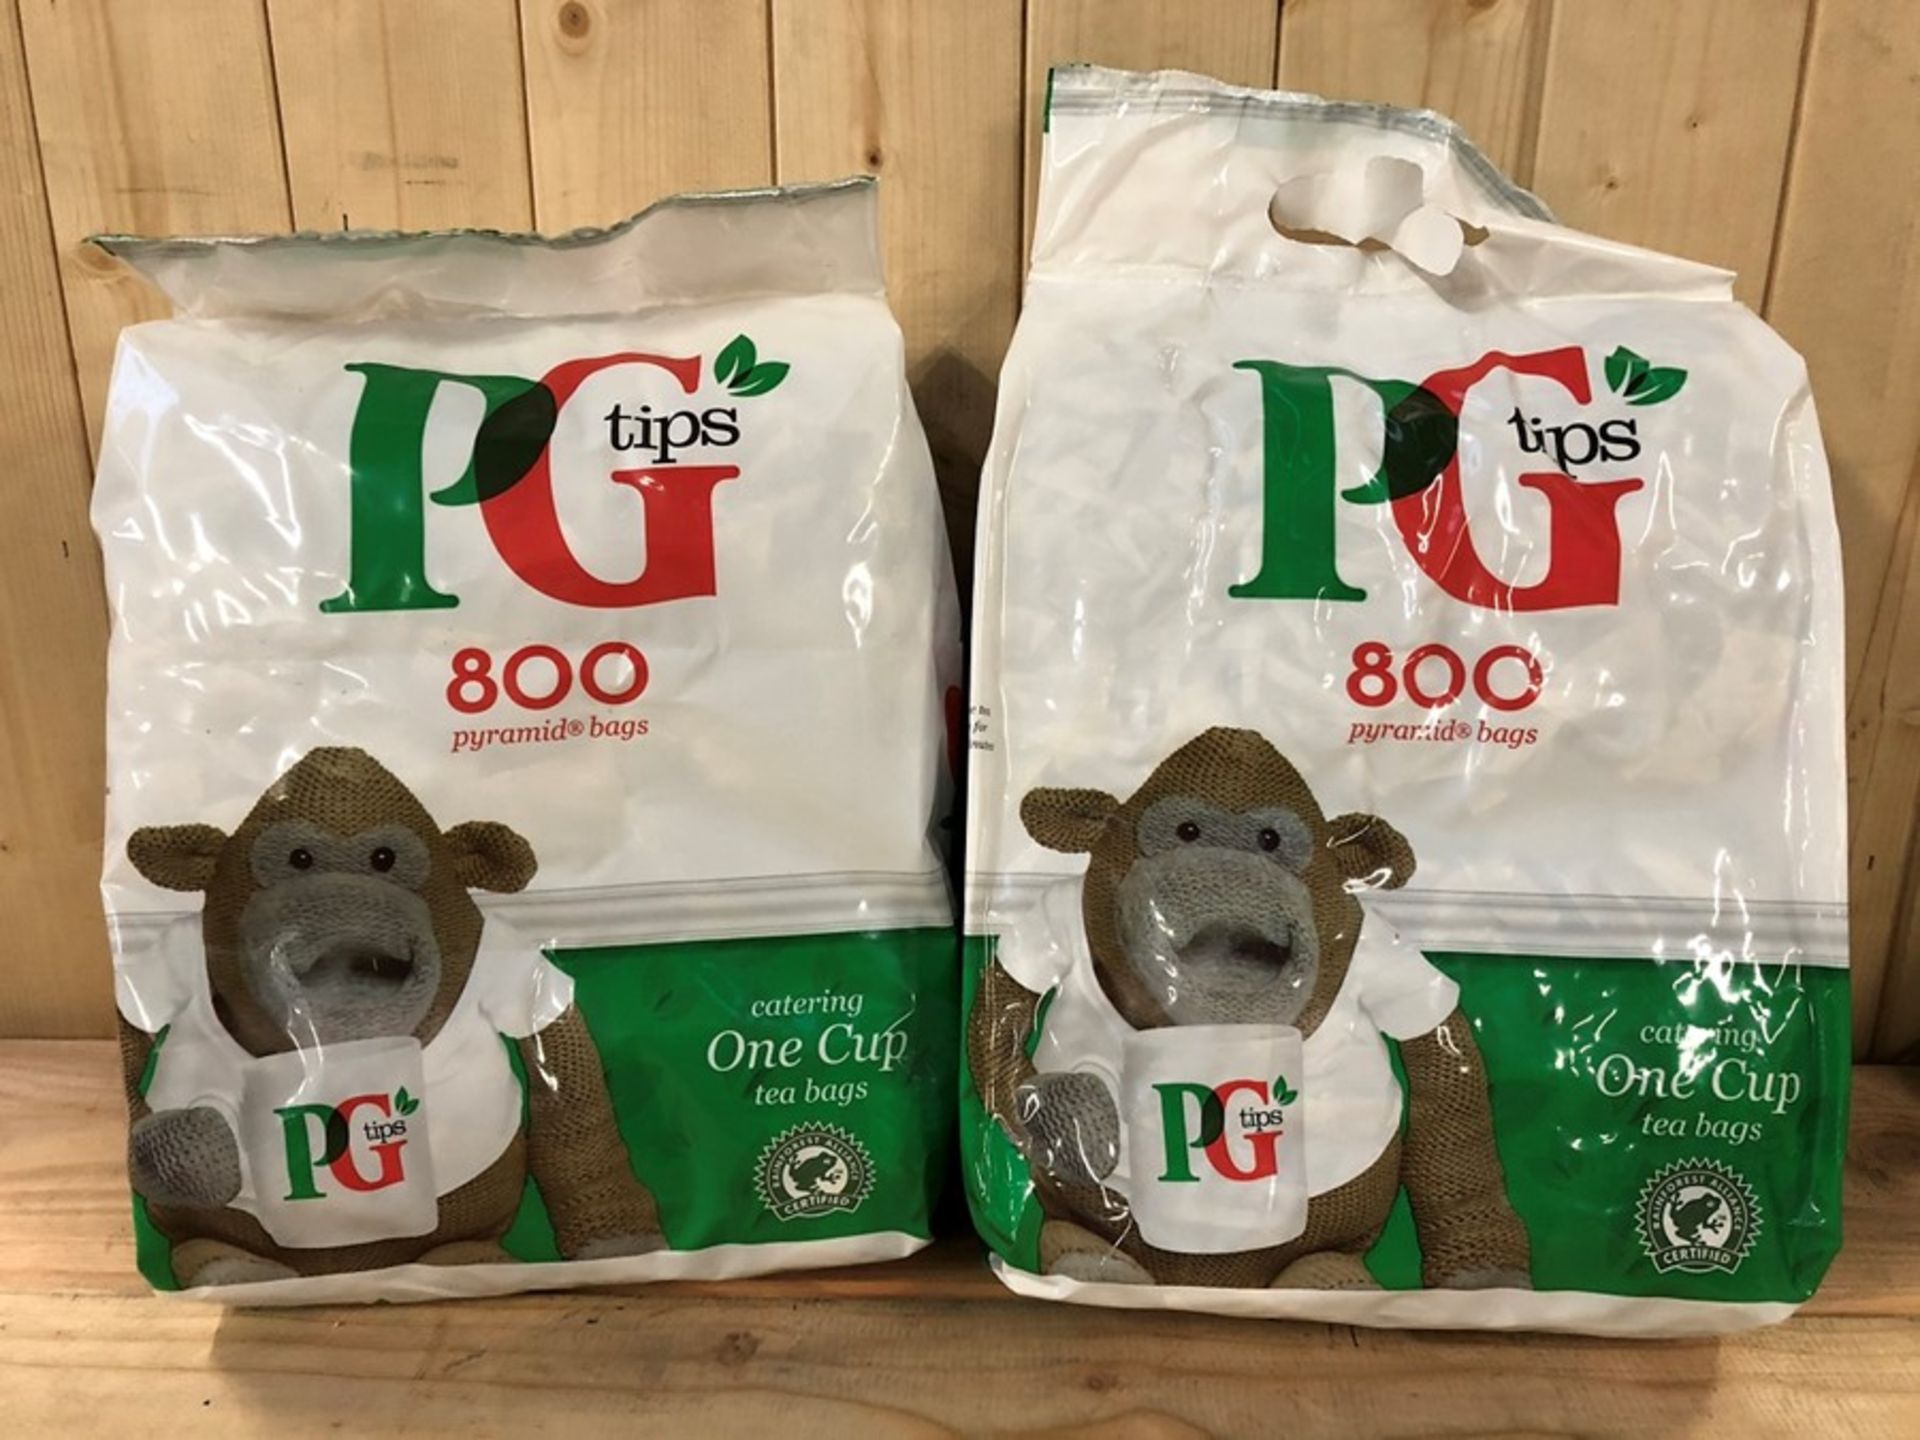 1 LOT TO CONTAIN 2 BAGS OF PG TIPS TEA 800 PYRAMID BAGS / TOTAL OF 1600 TEA BAGS / BEST BEFORE 10/